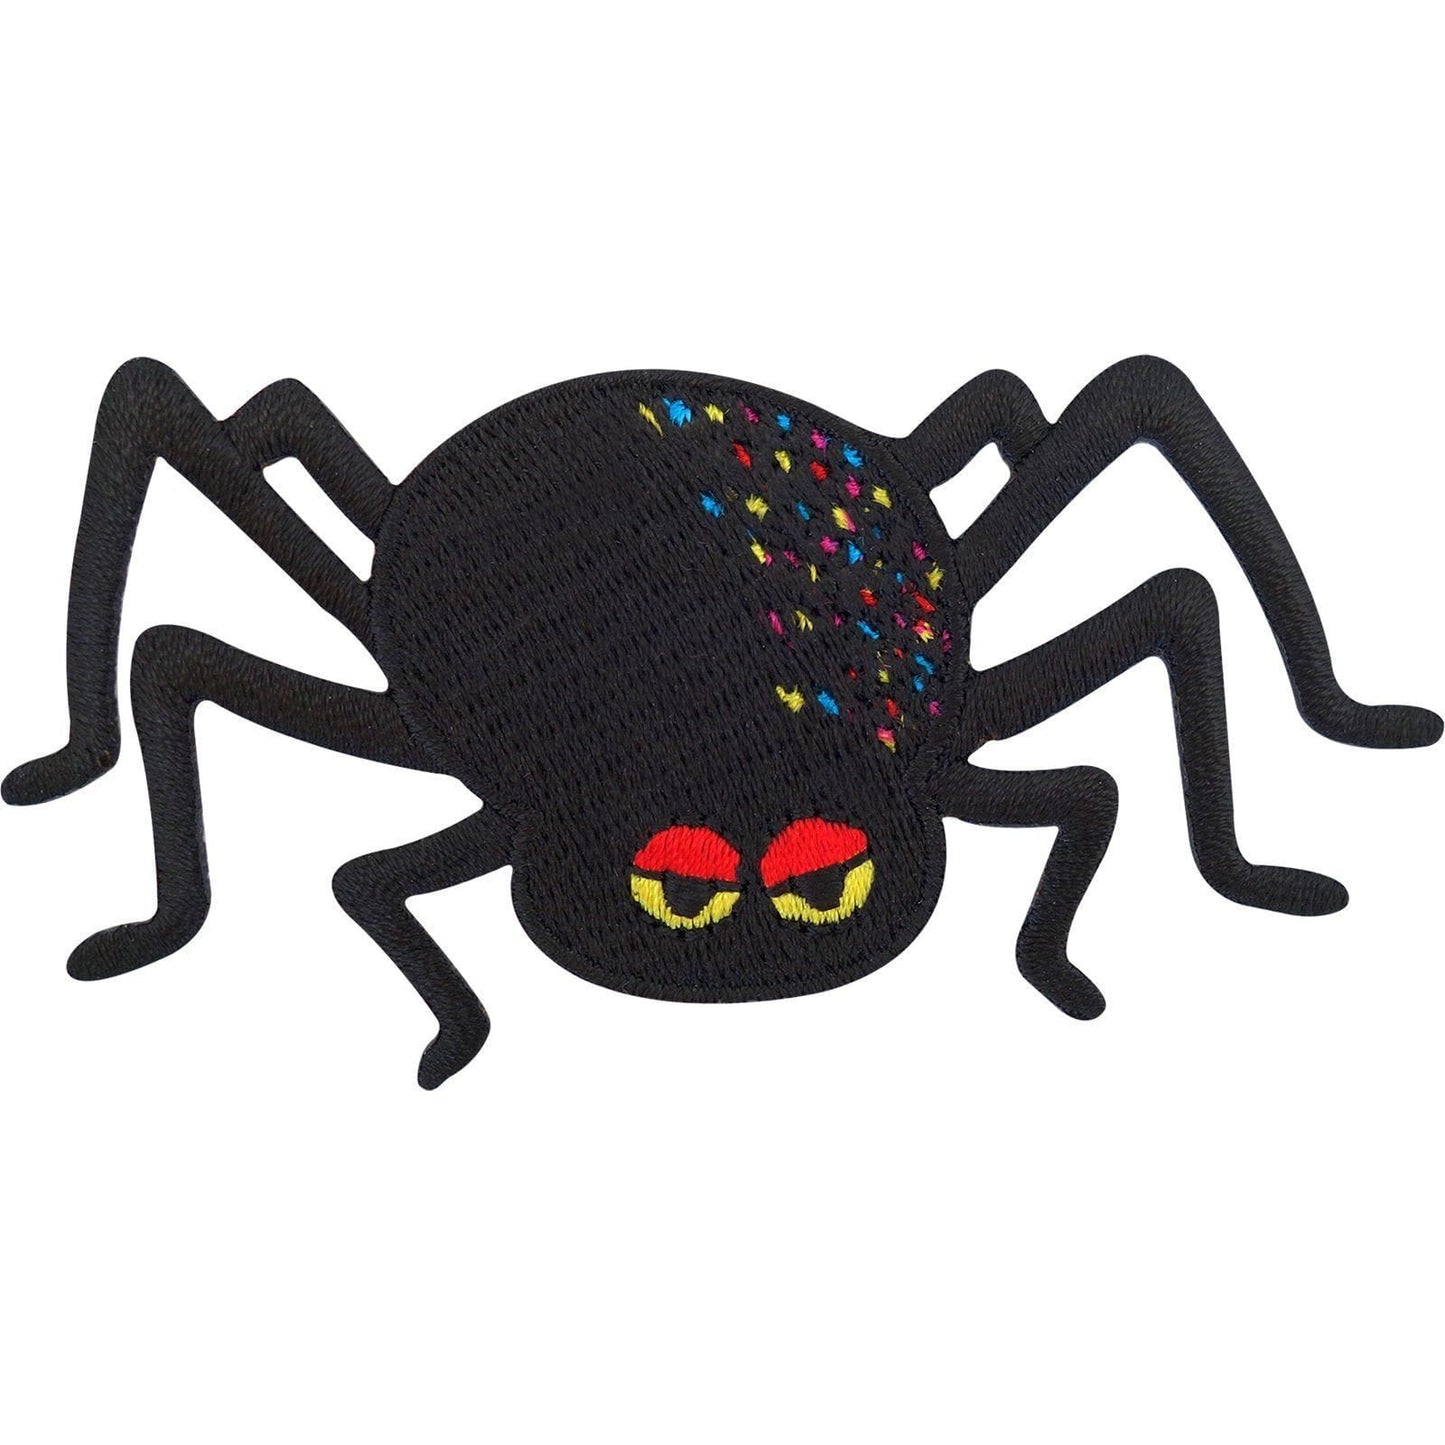 Spider Patch Iron On Badge / Sew On Cloth Embroidered Applique Embroidery Motif